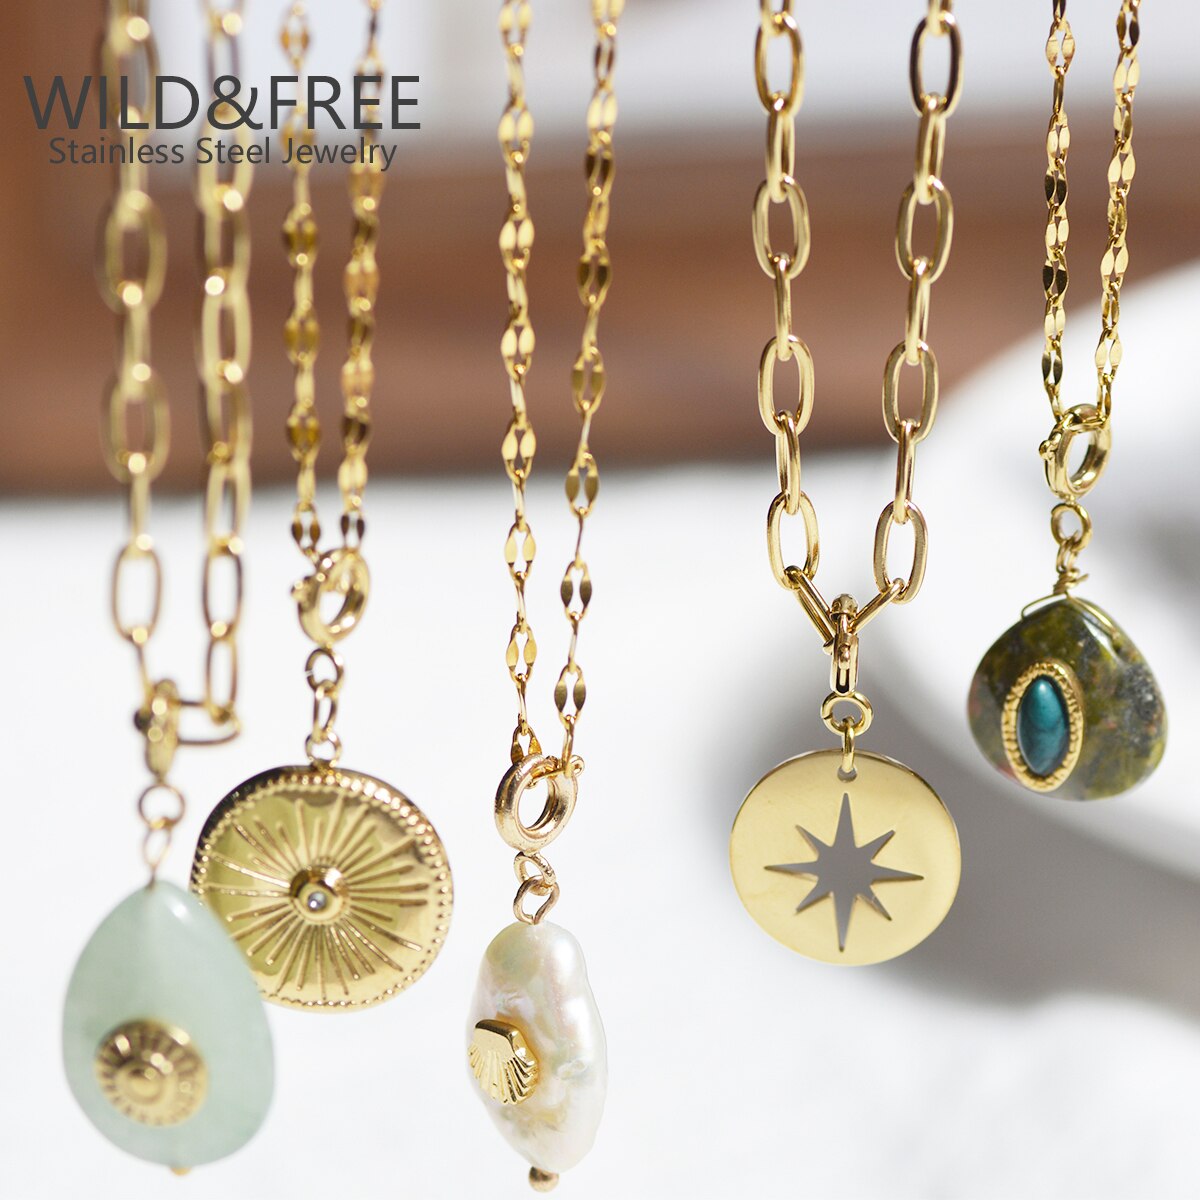 Star & Eye Natural Stone Charm Necklaces